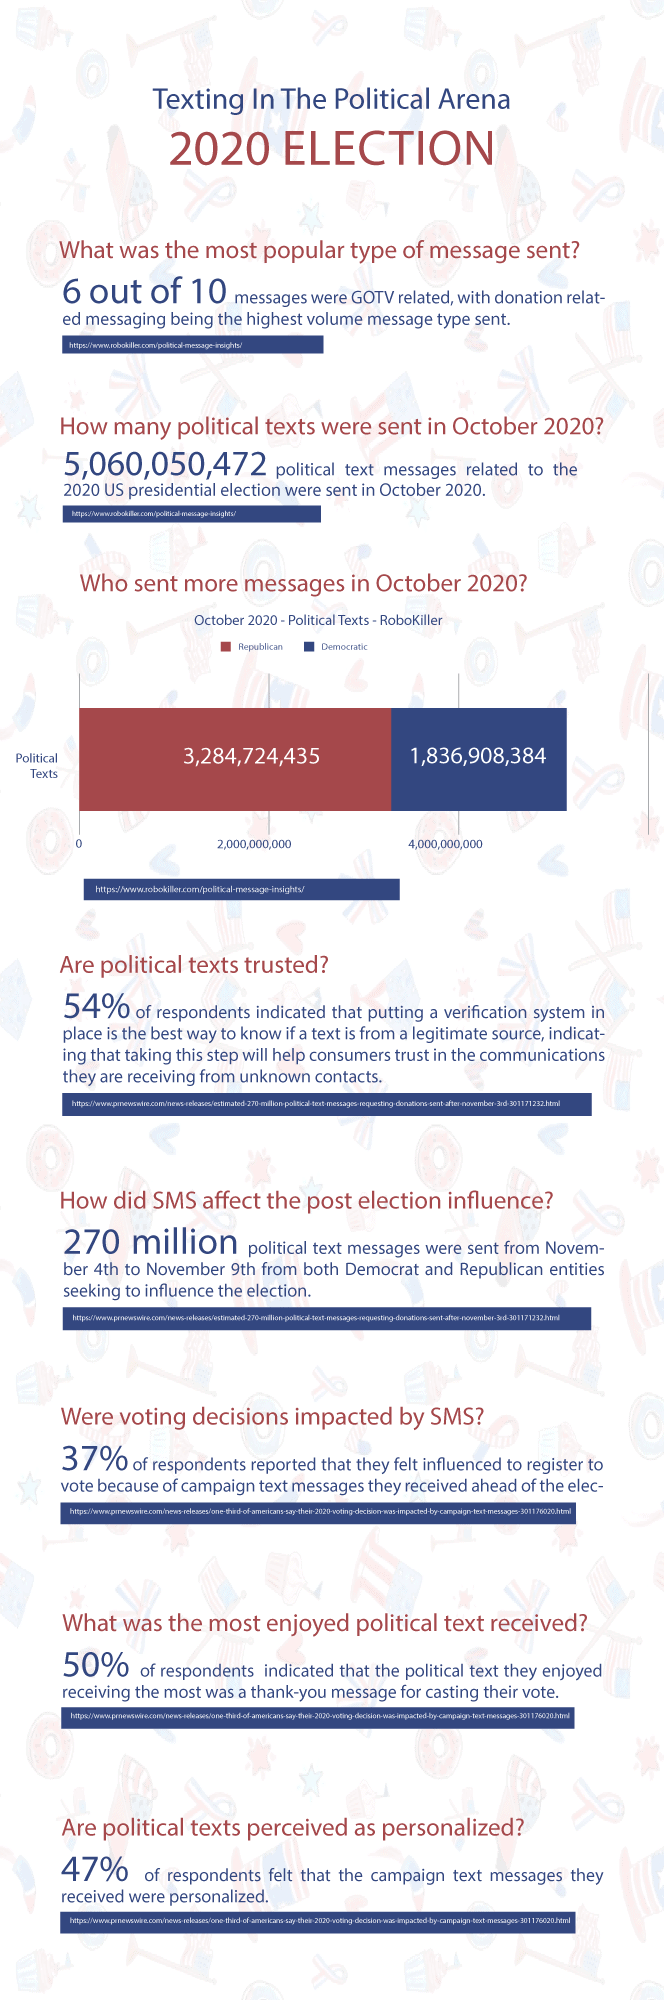 The Power of Political Text Messaging in the 2020 Election Infographic